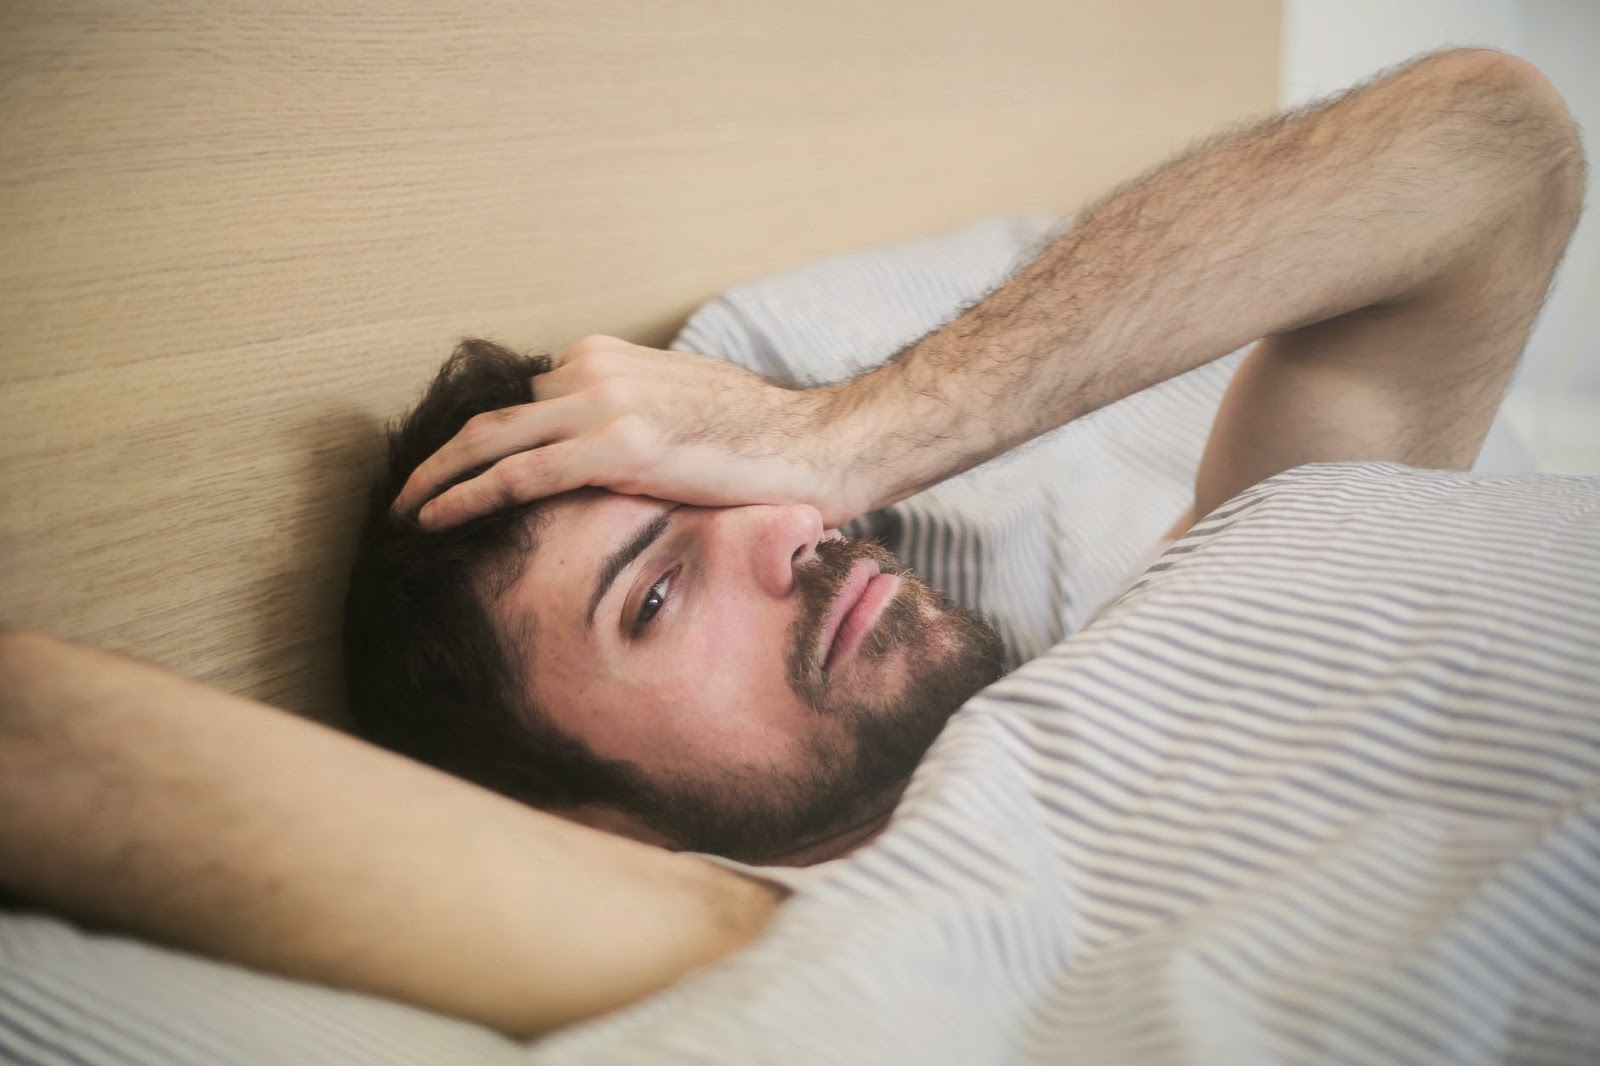 If Your Mornings Are Not Pleased You Would Need to Follow These Things When You Wake Up